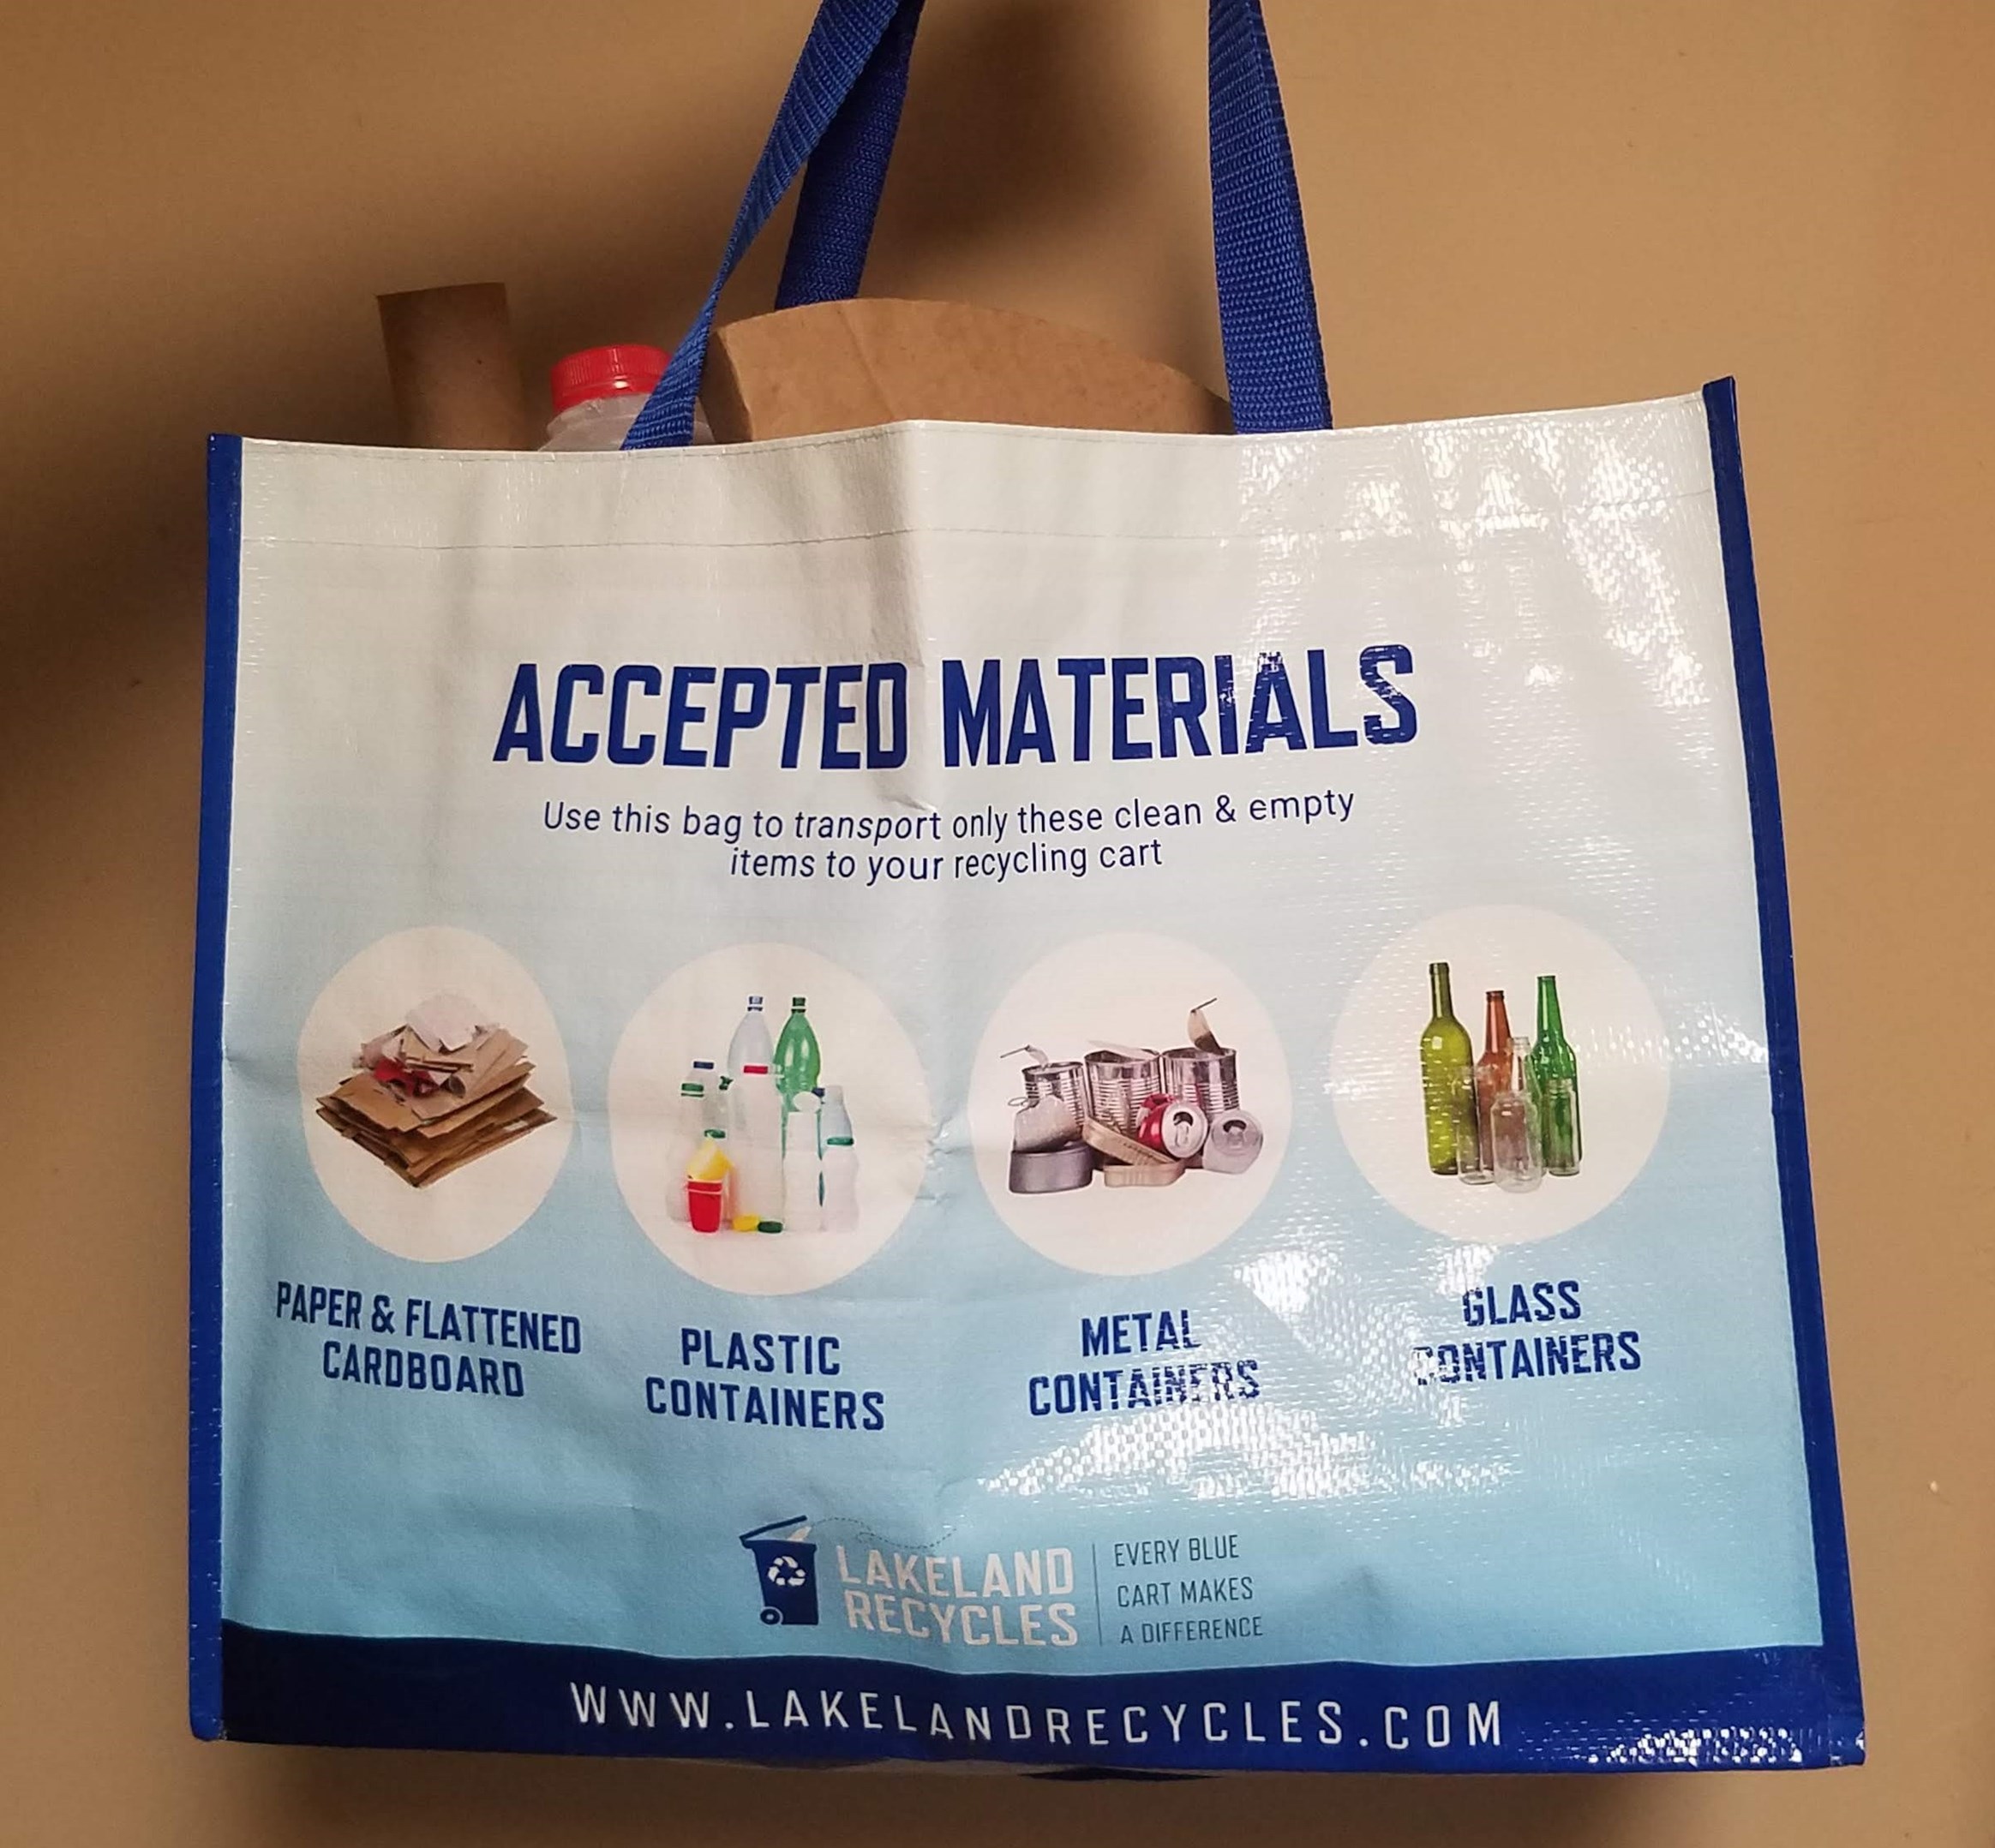 Recycling Totebag from the City of Lakeland with acceptable materials listed